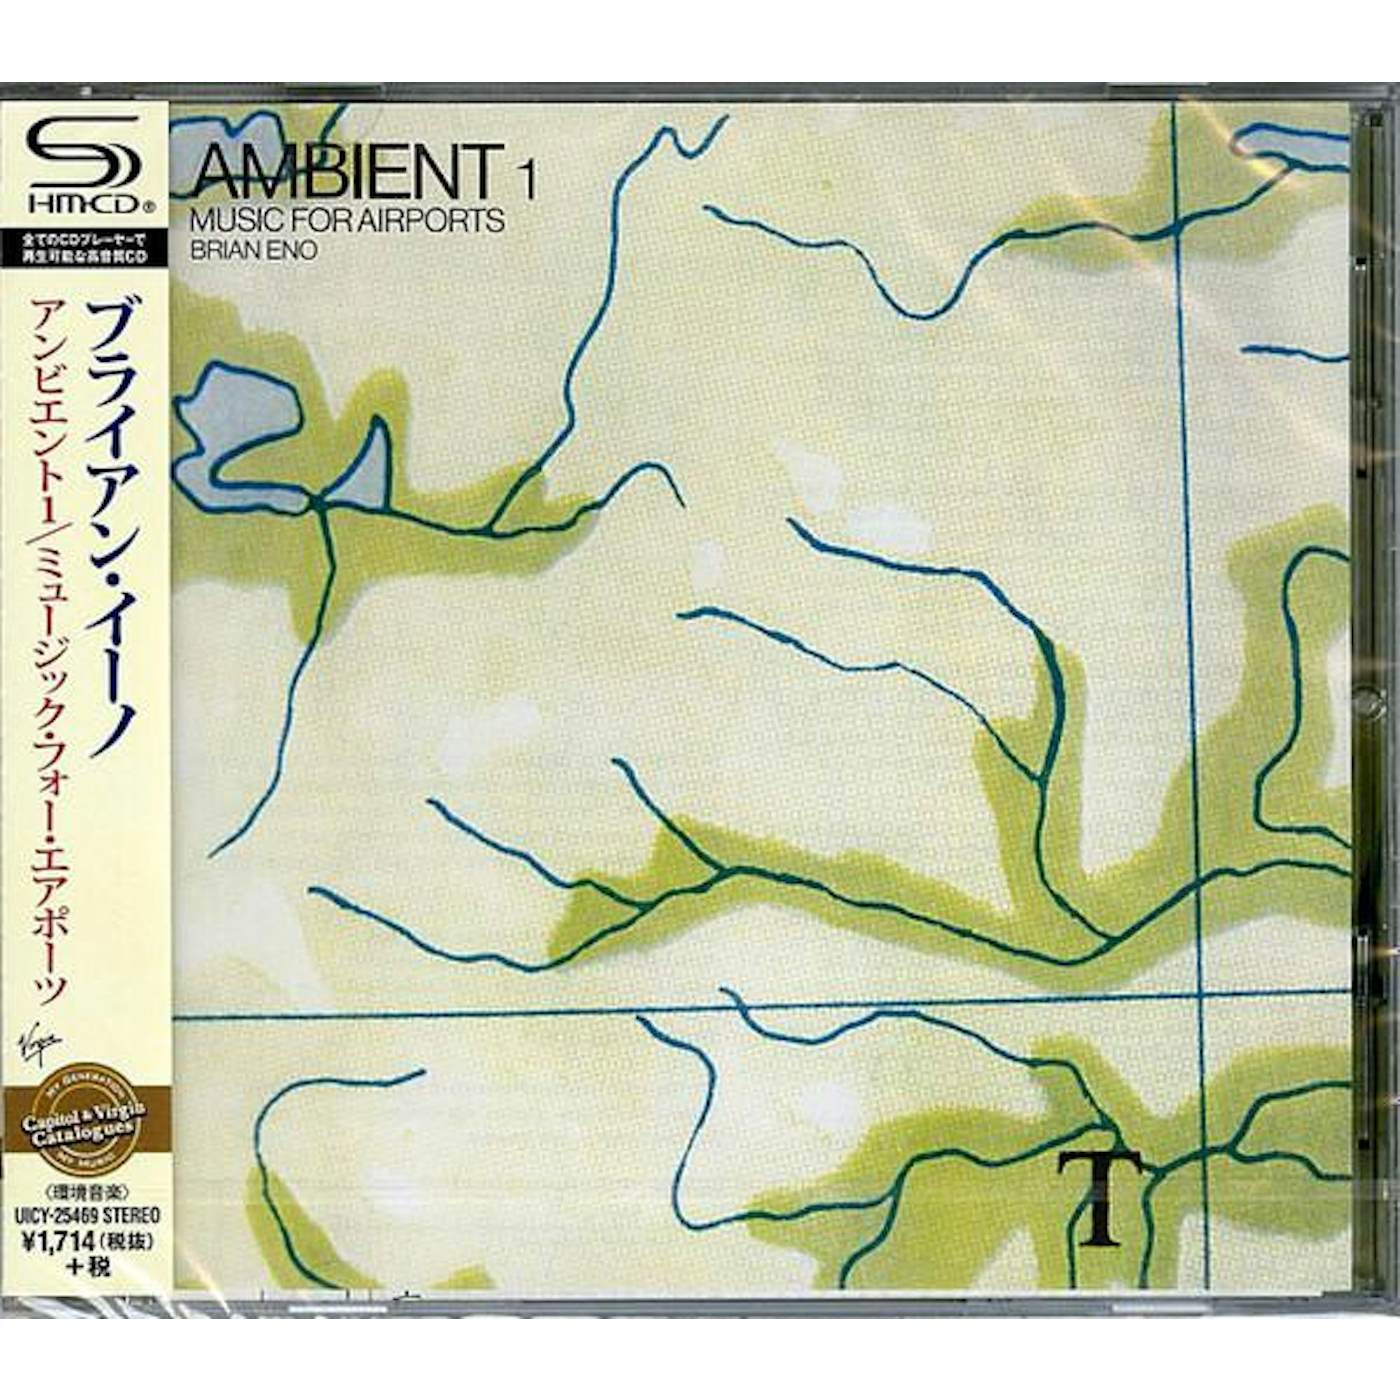 Brian Eno AMBIENT 1: MUSIC FOR AIRPORTS CD